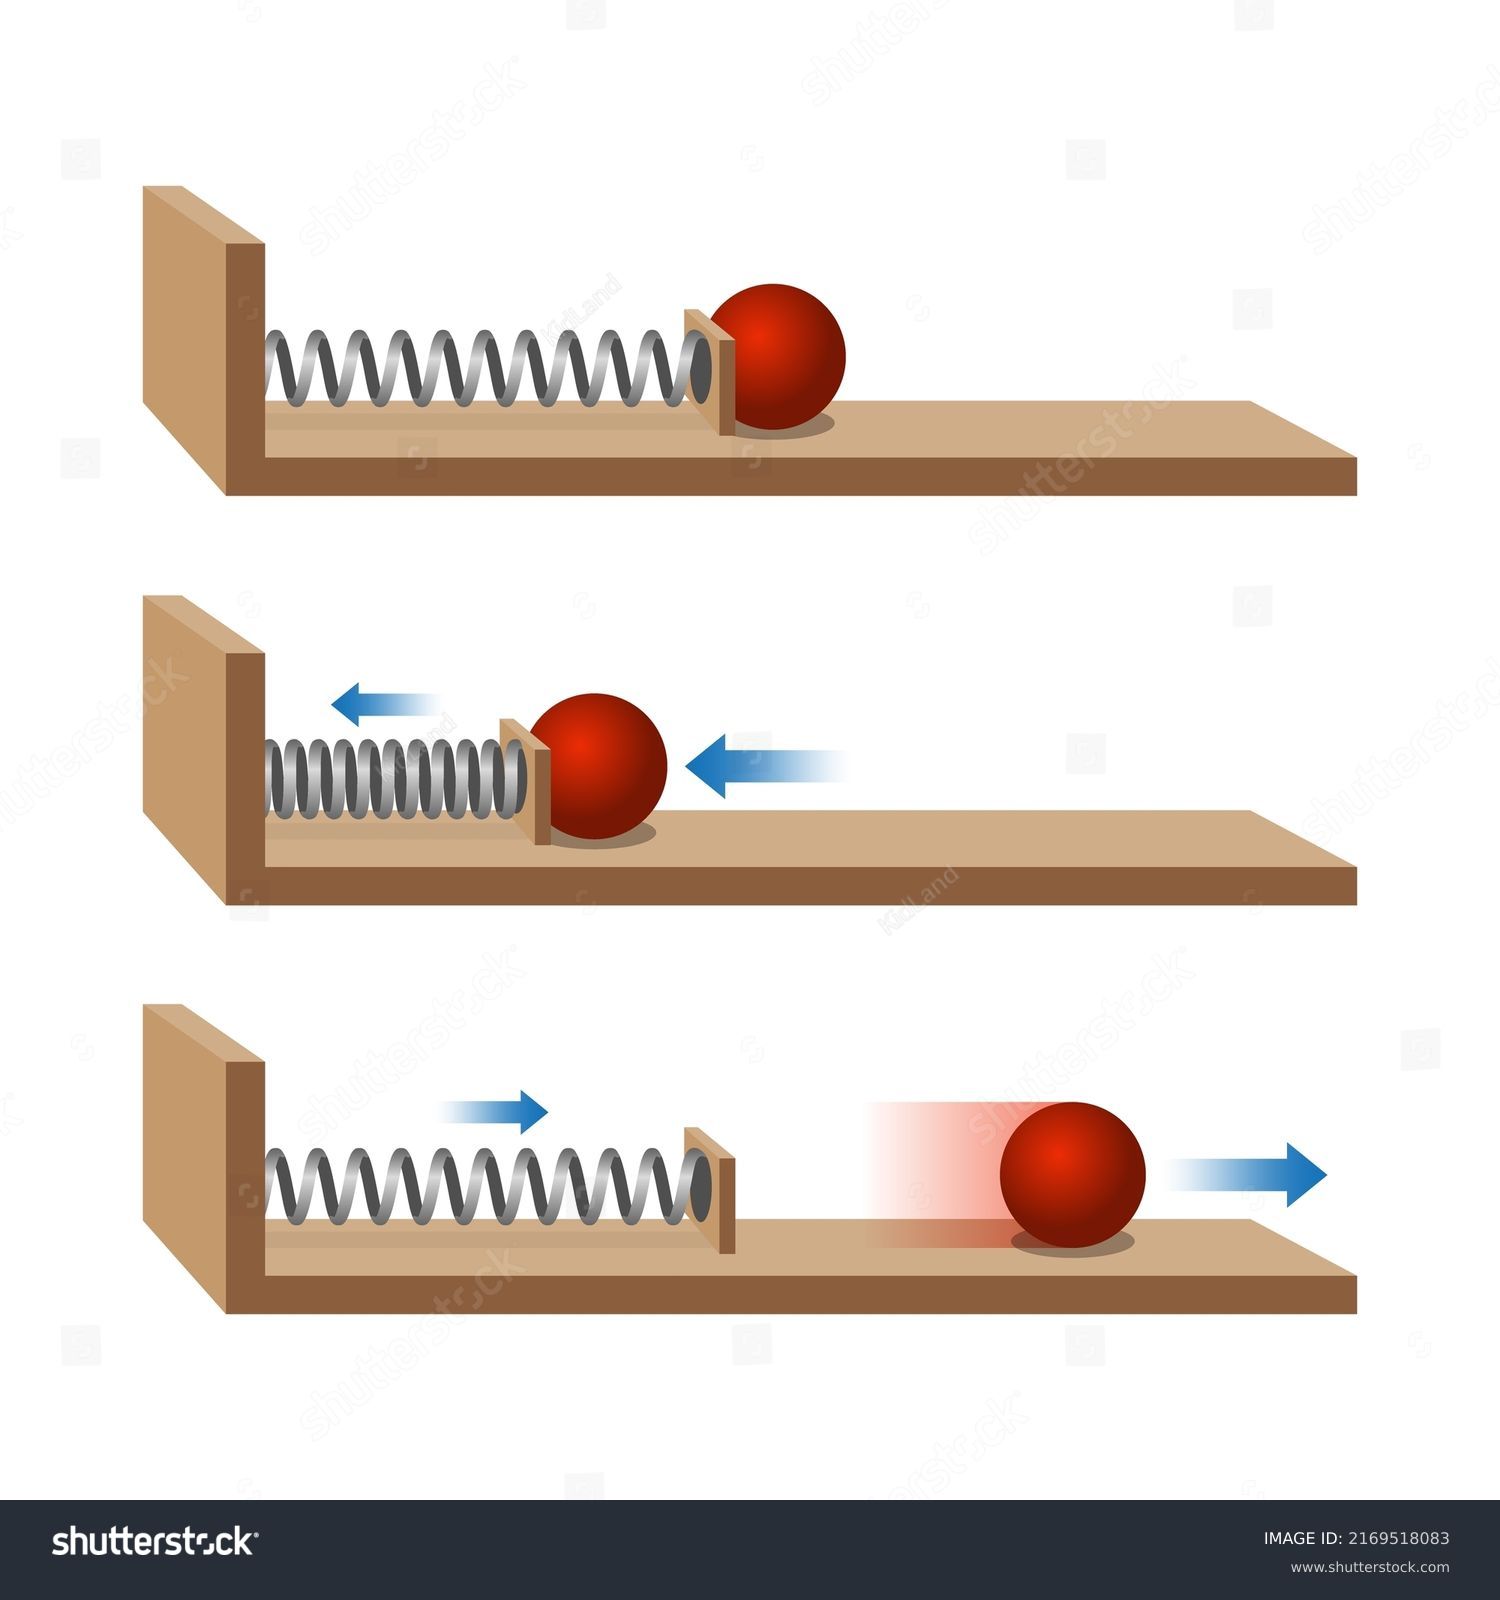 Newton's third Law of Motion. Law of inertia. Compression force. Extension force. Physics experience with springs and balls. Change speed of movement of object depending on action of spring. #2169518083